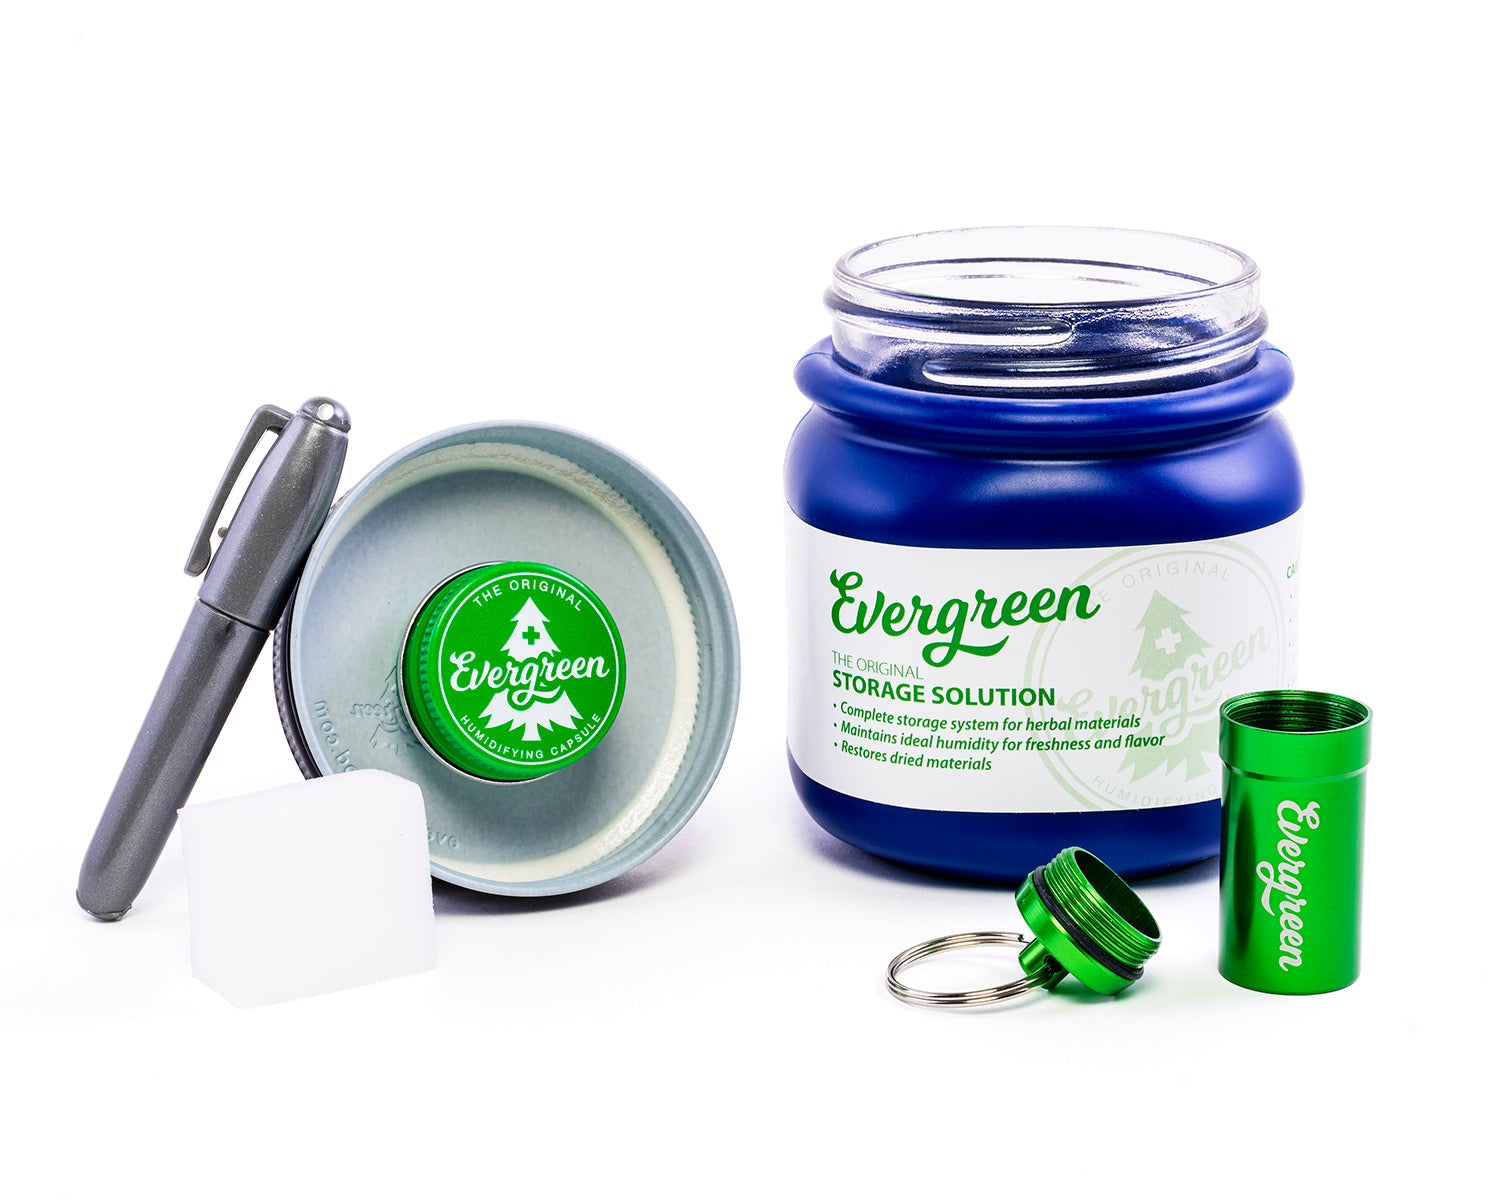 Evergreen Storage Solution open showing contents cobalt blue